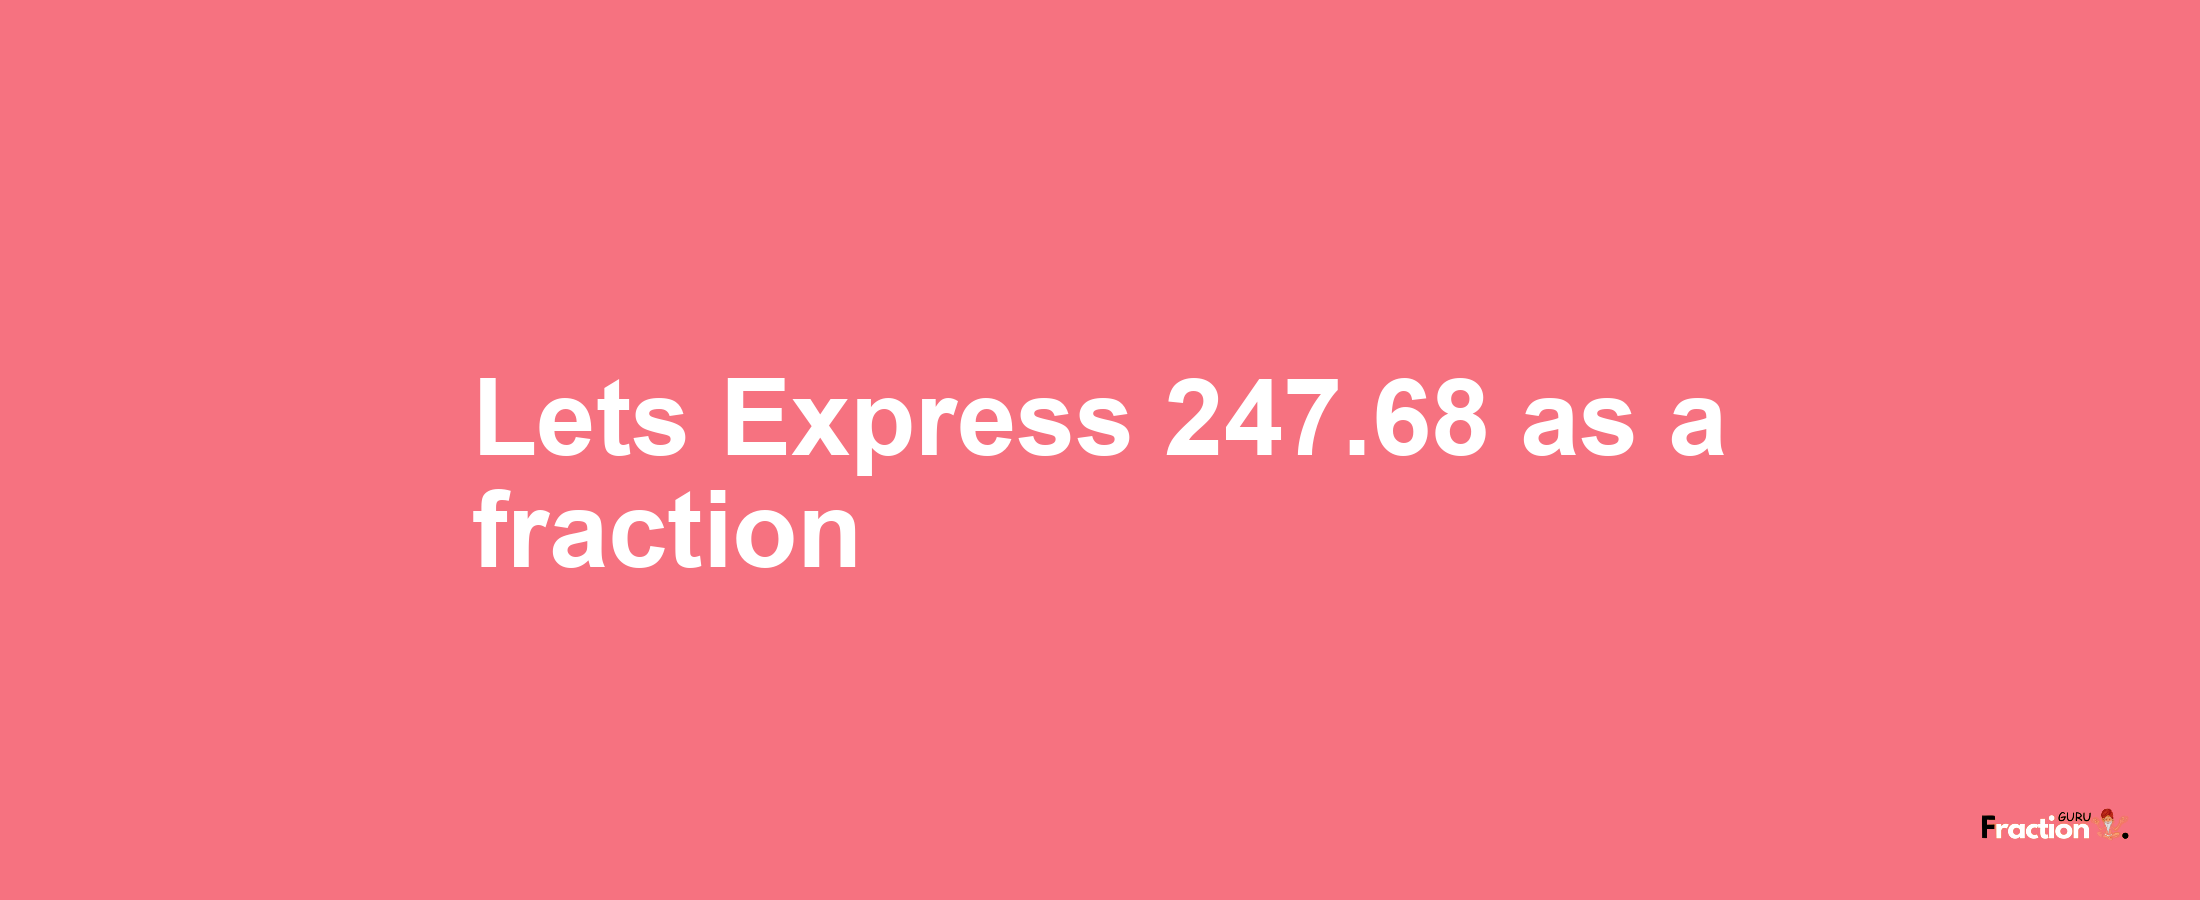 Lets Express 247.68 as afraction